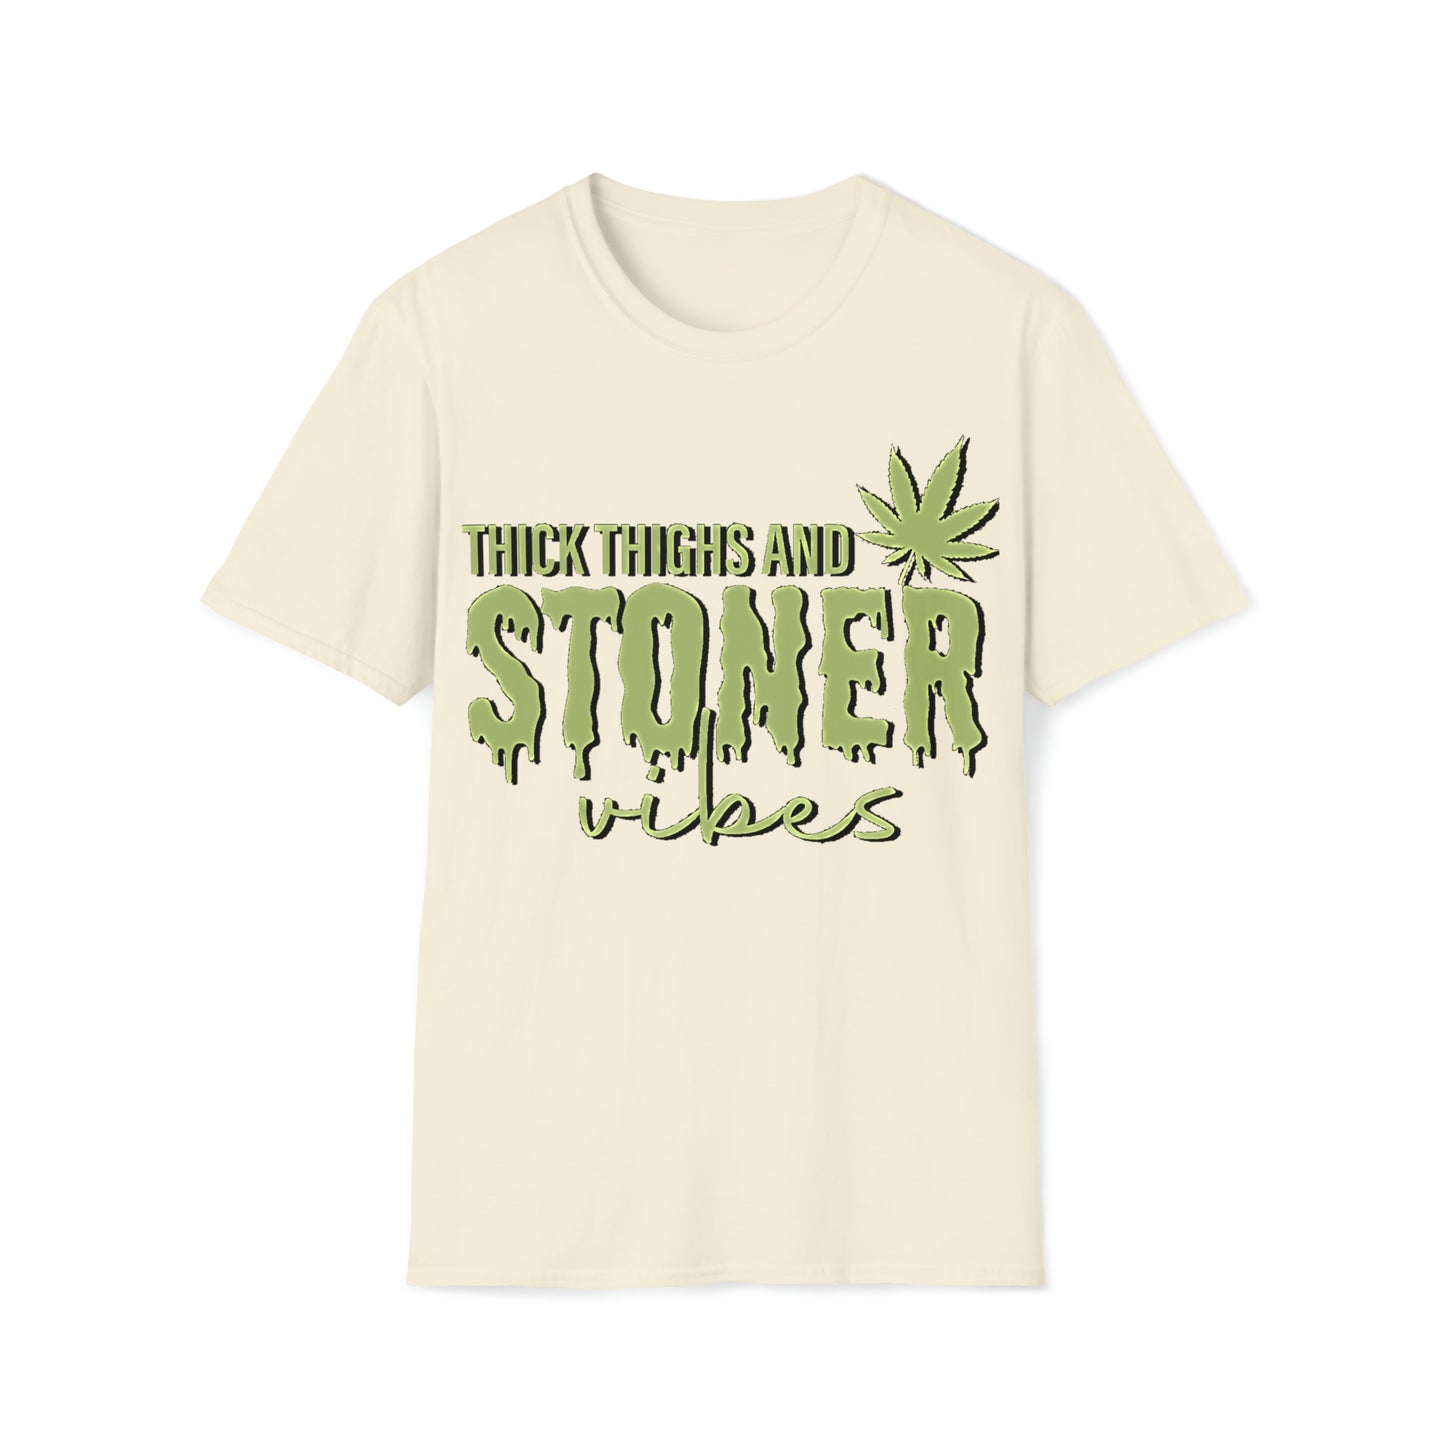 Thick Thighs Stoner Vibes Green Tee